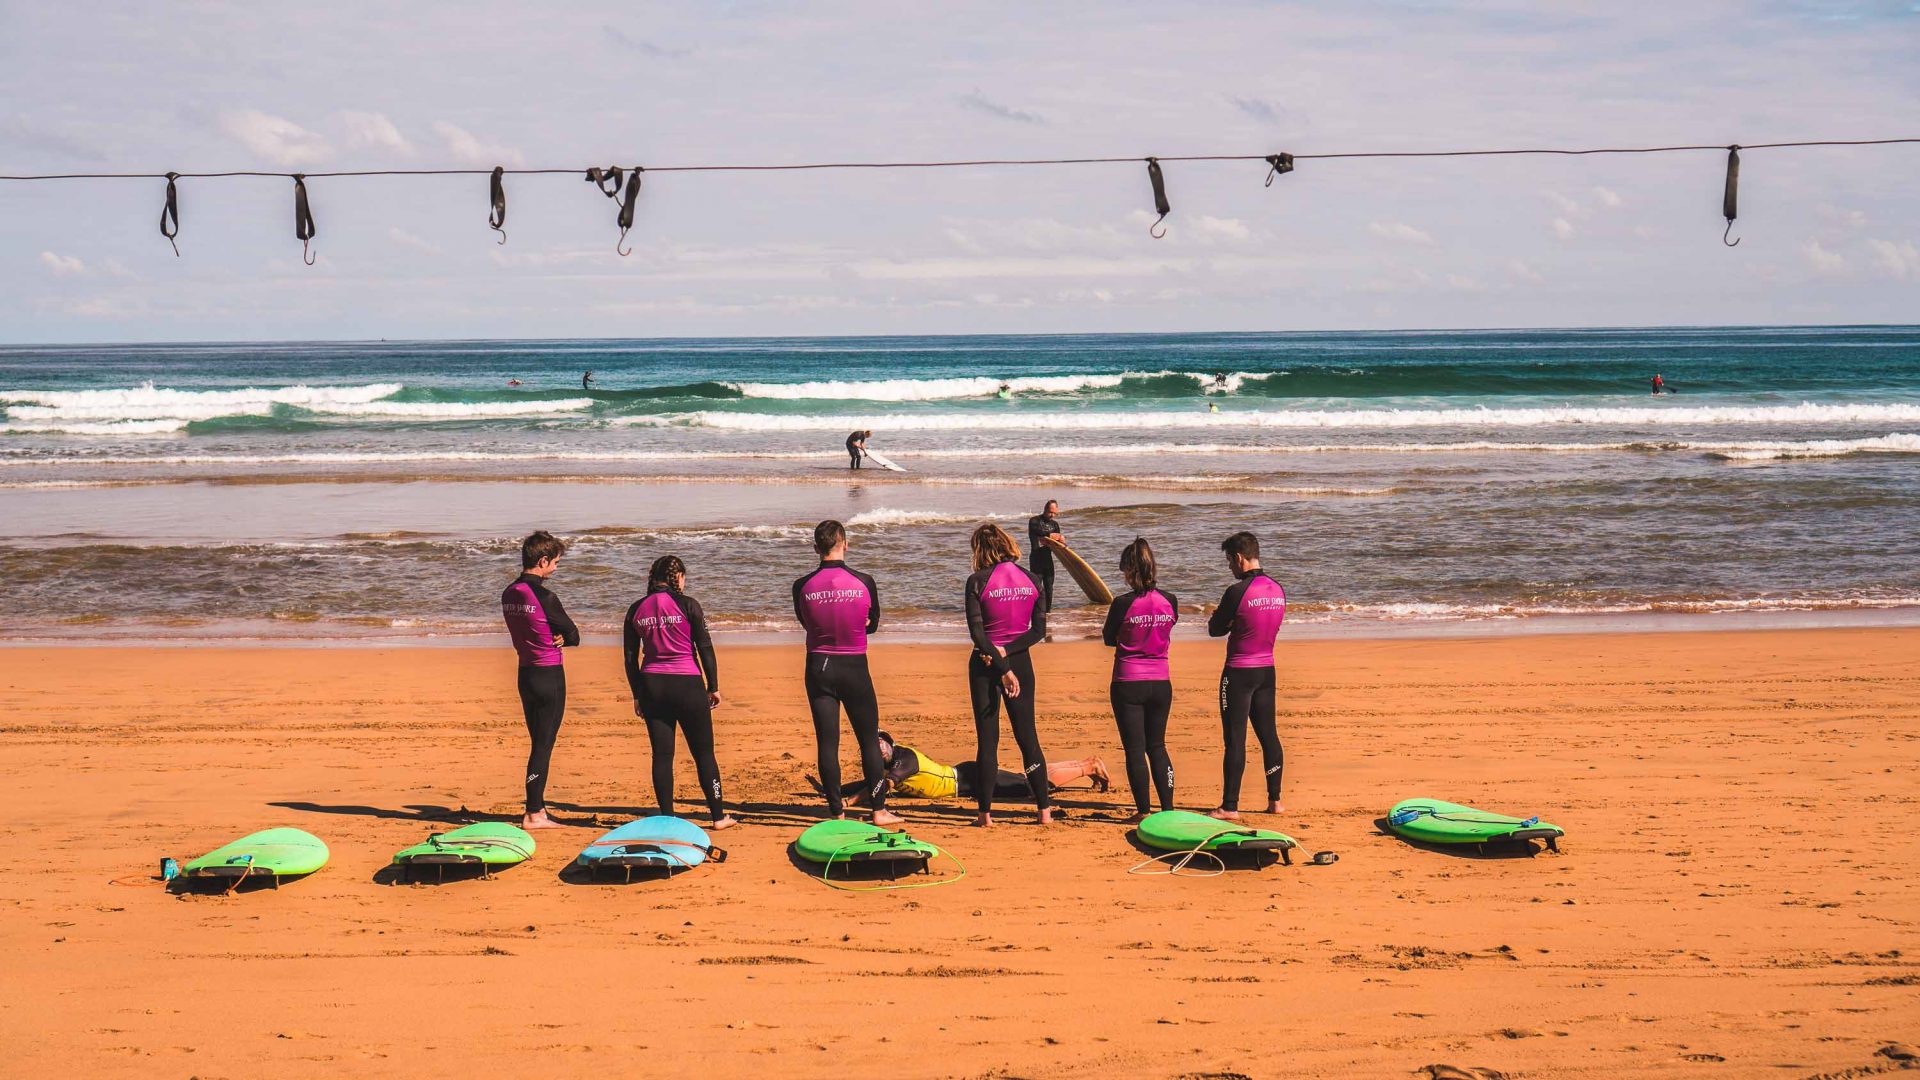 A guide teaches surfing to a group of people.